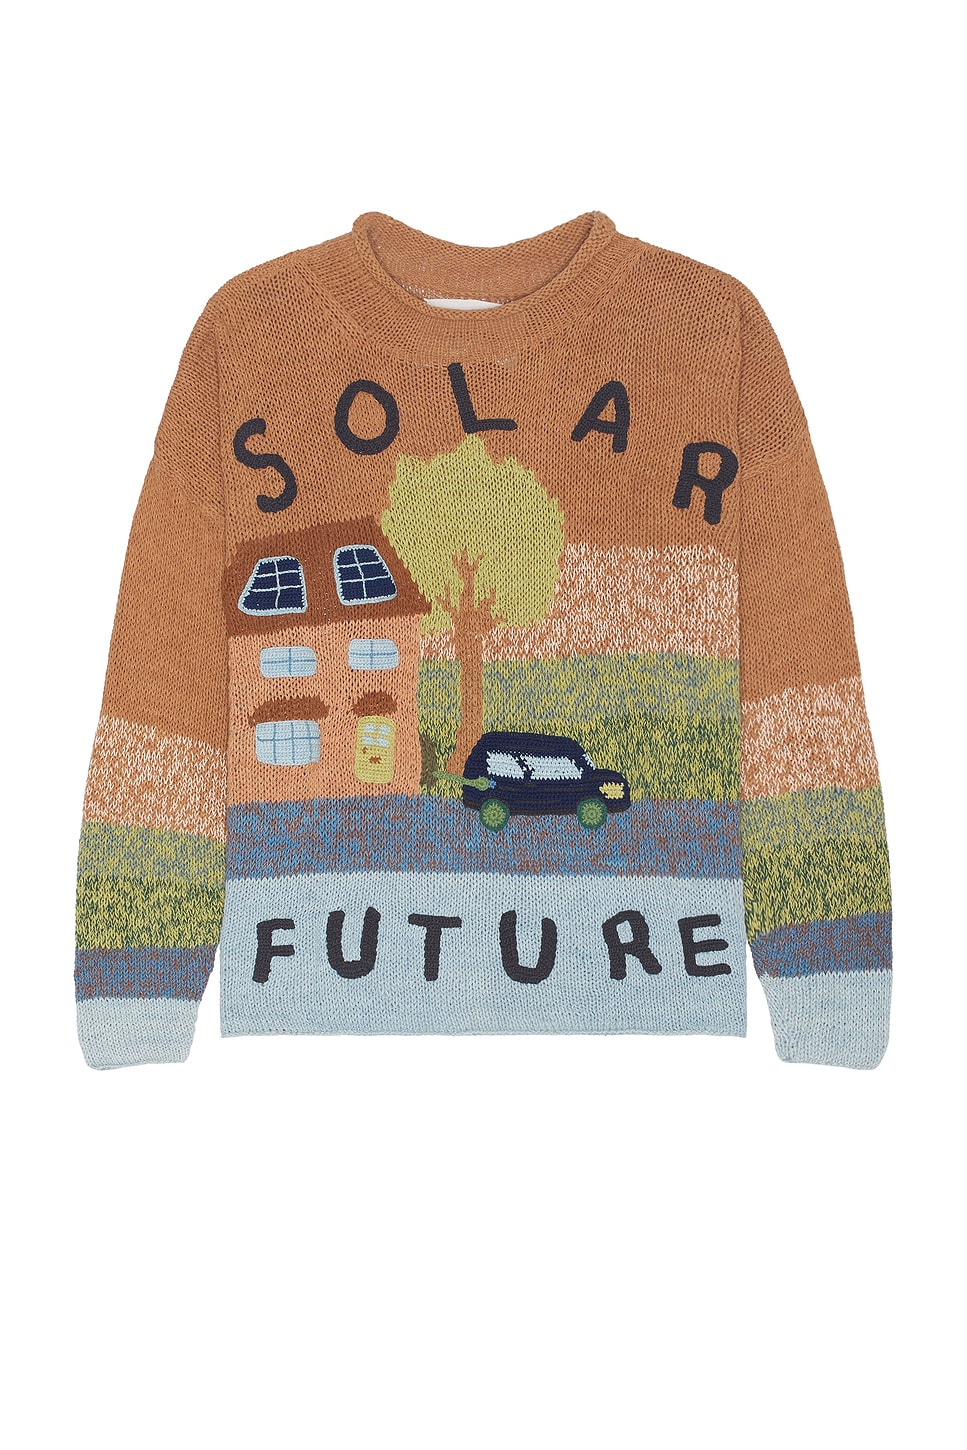 Image 1 of Story mfg. Hand Knit Twinsun Cardigan in Clay Solare Future